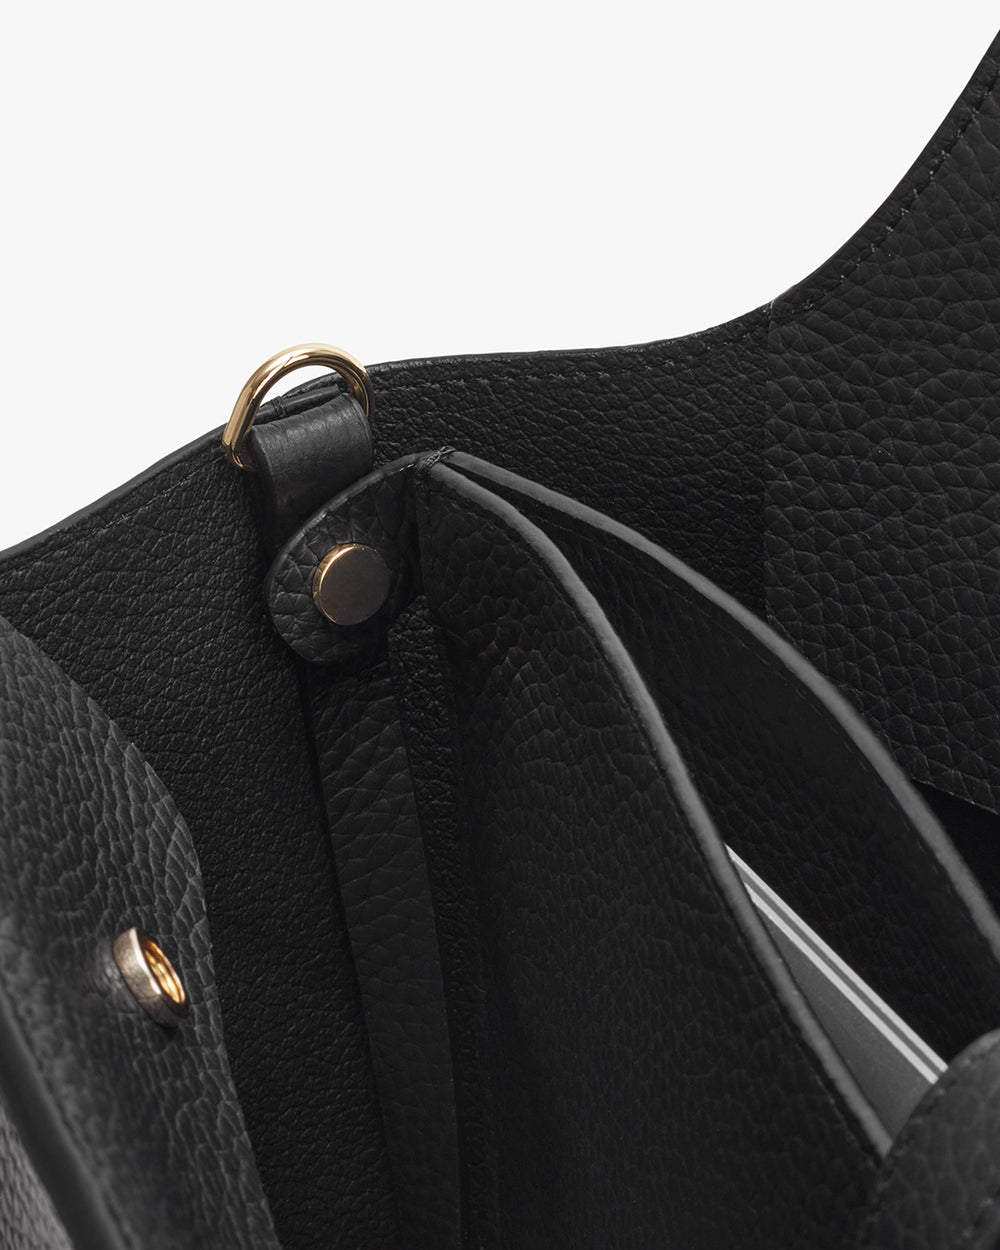 Close-up view of an open handbag with visible inner compartments.